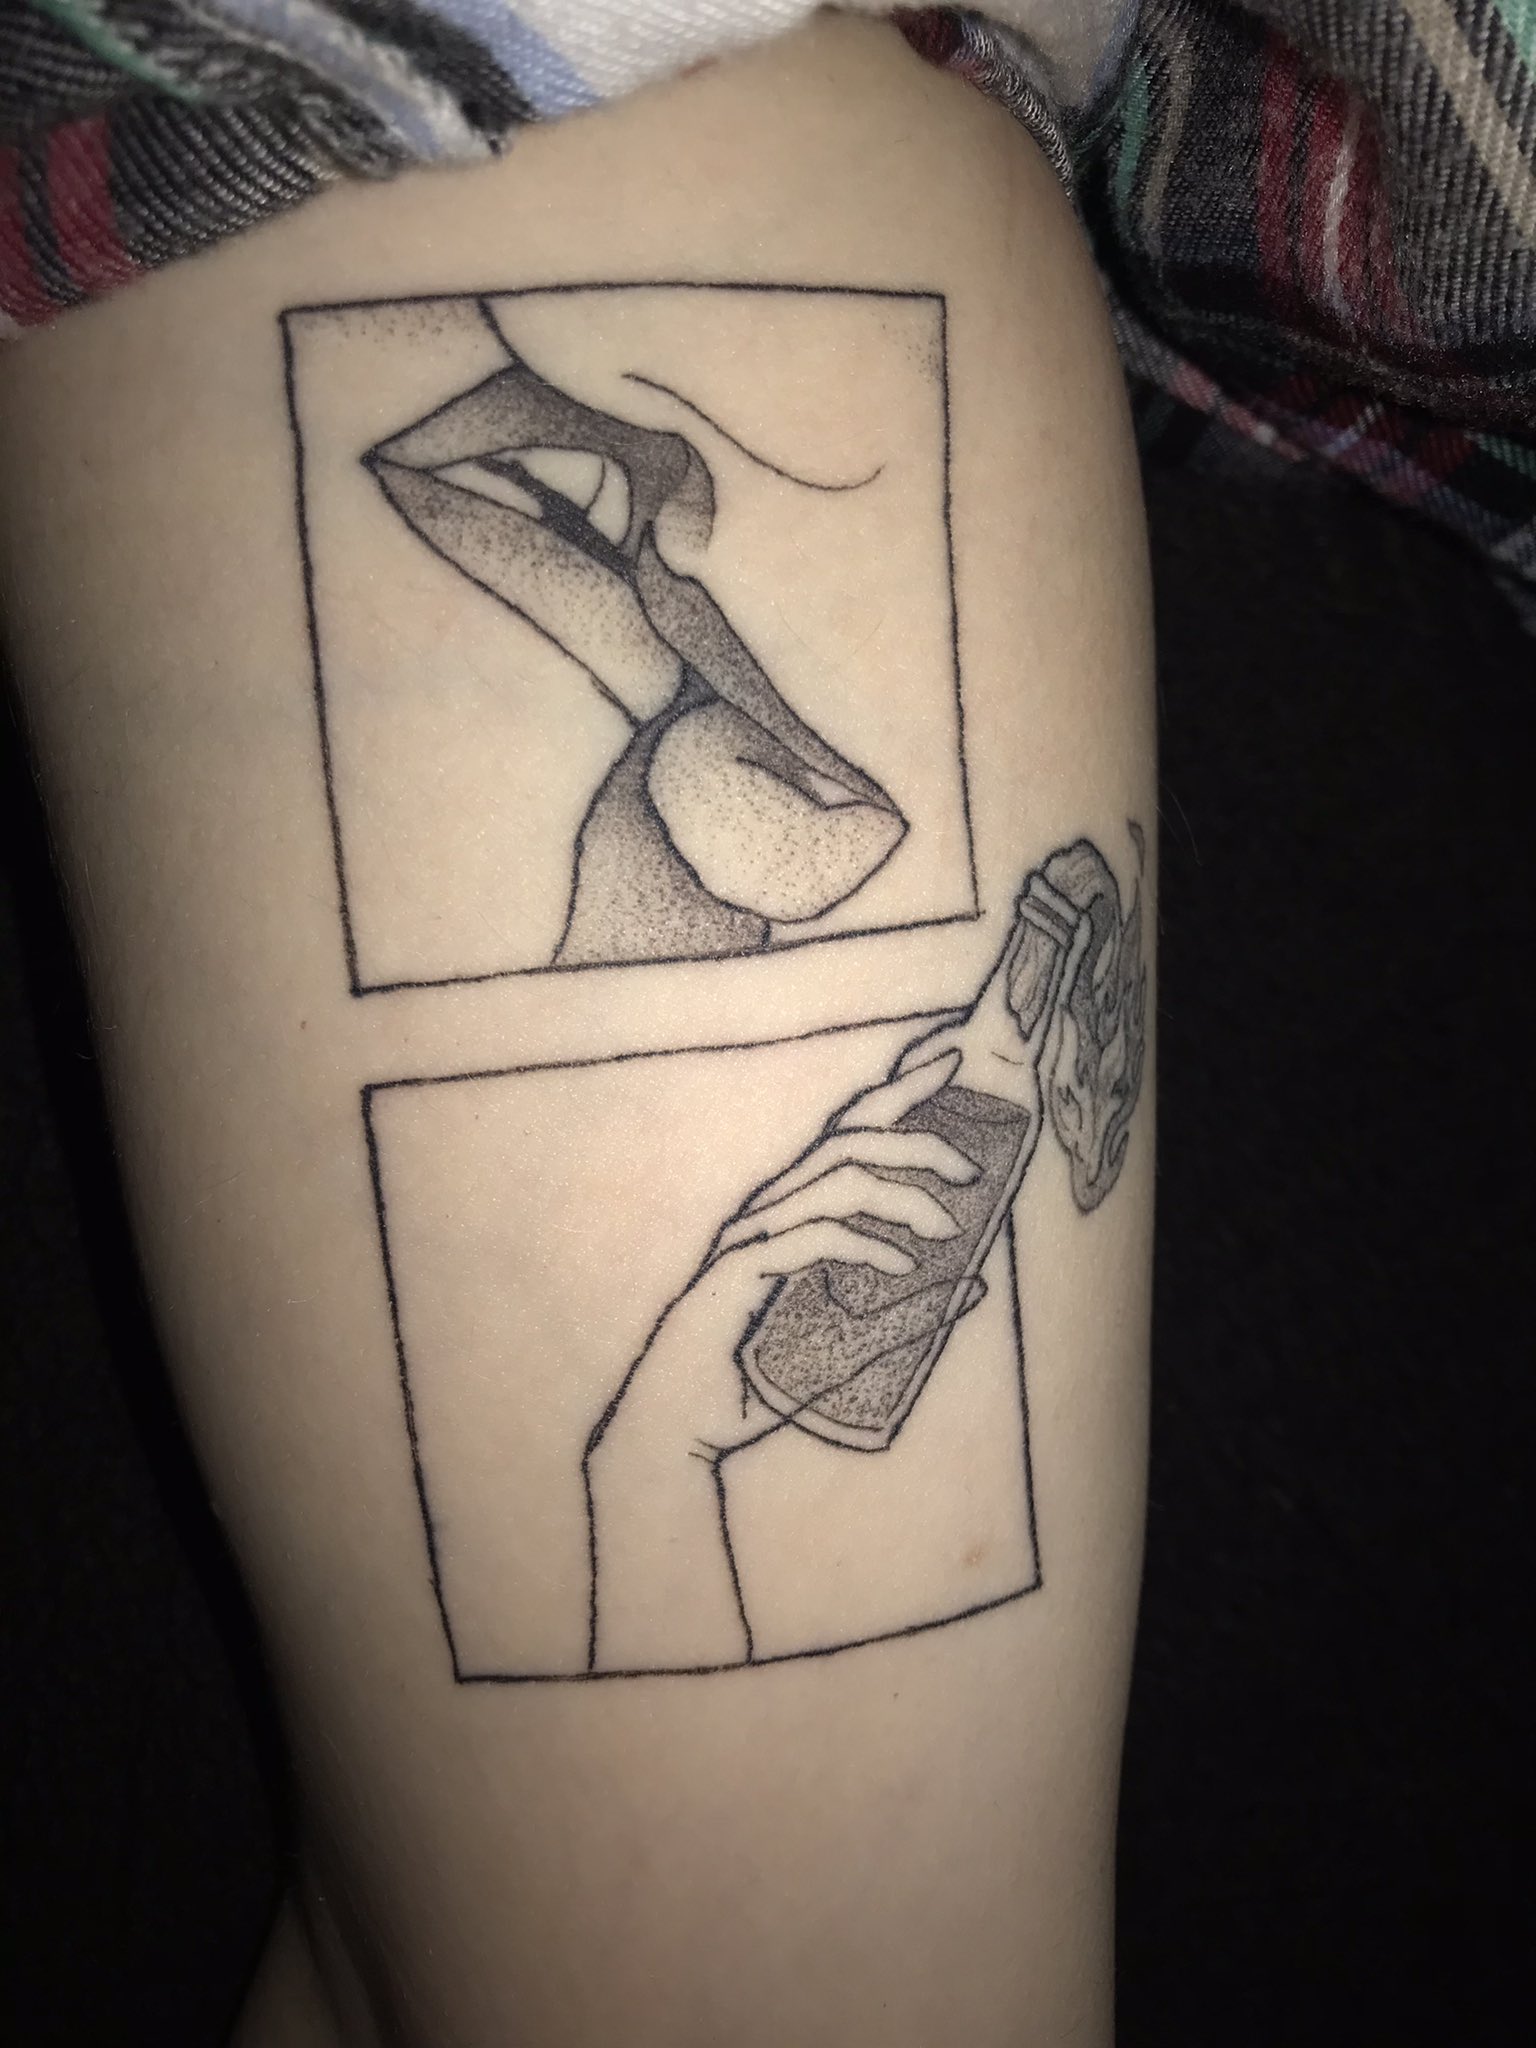 A tattoo of two feminine lips kissing above a Molotov cocktail